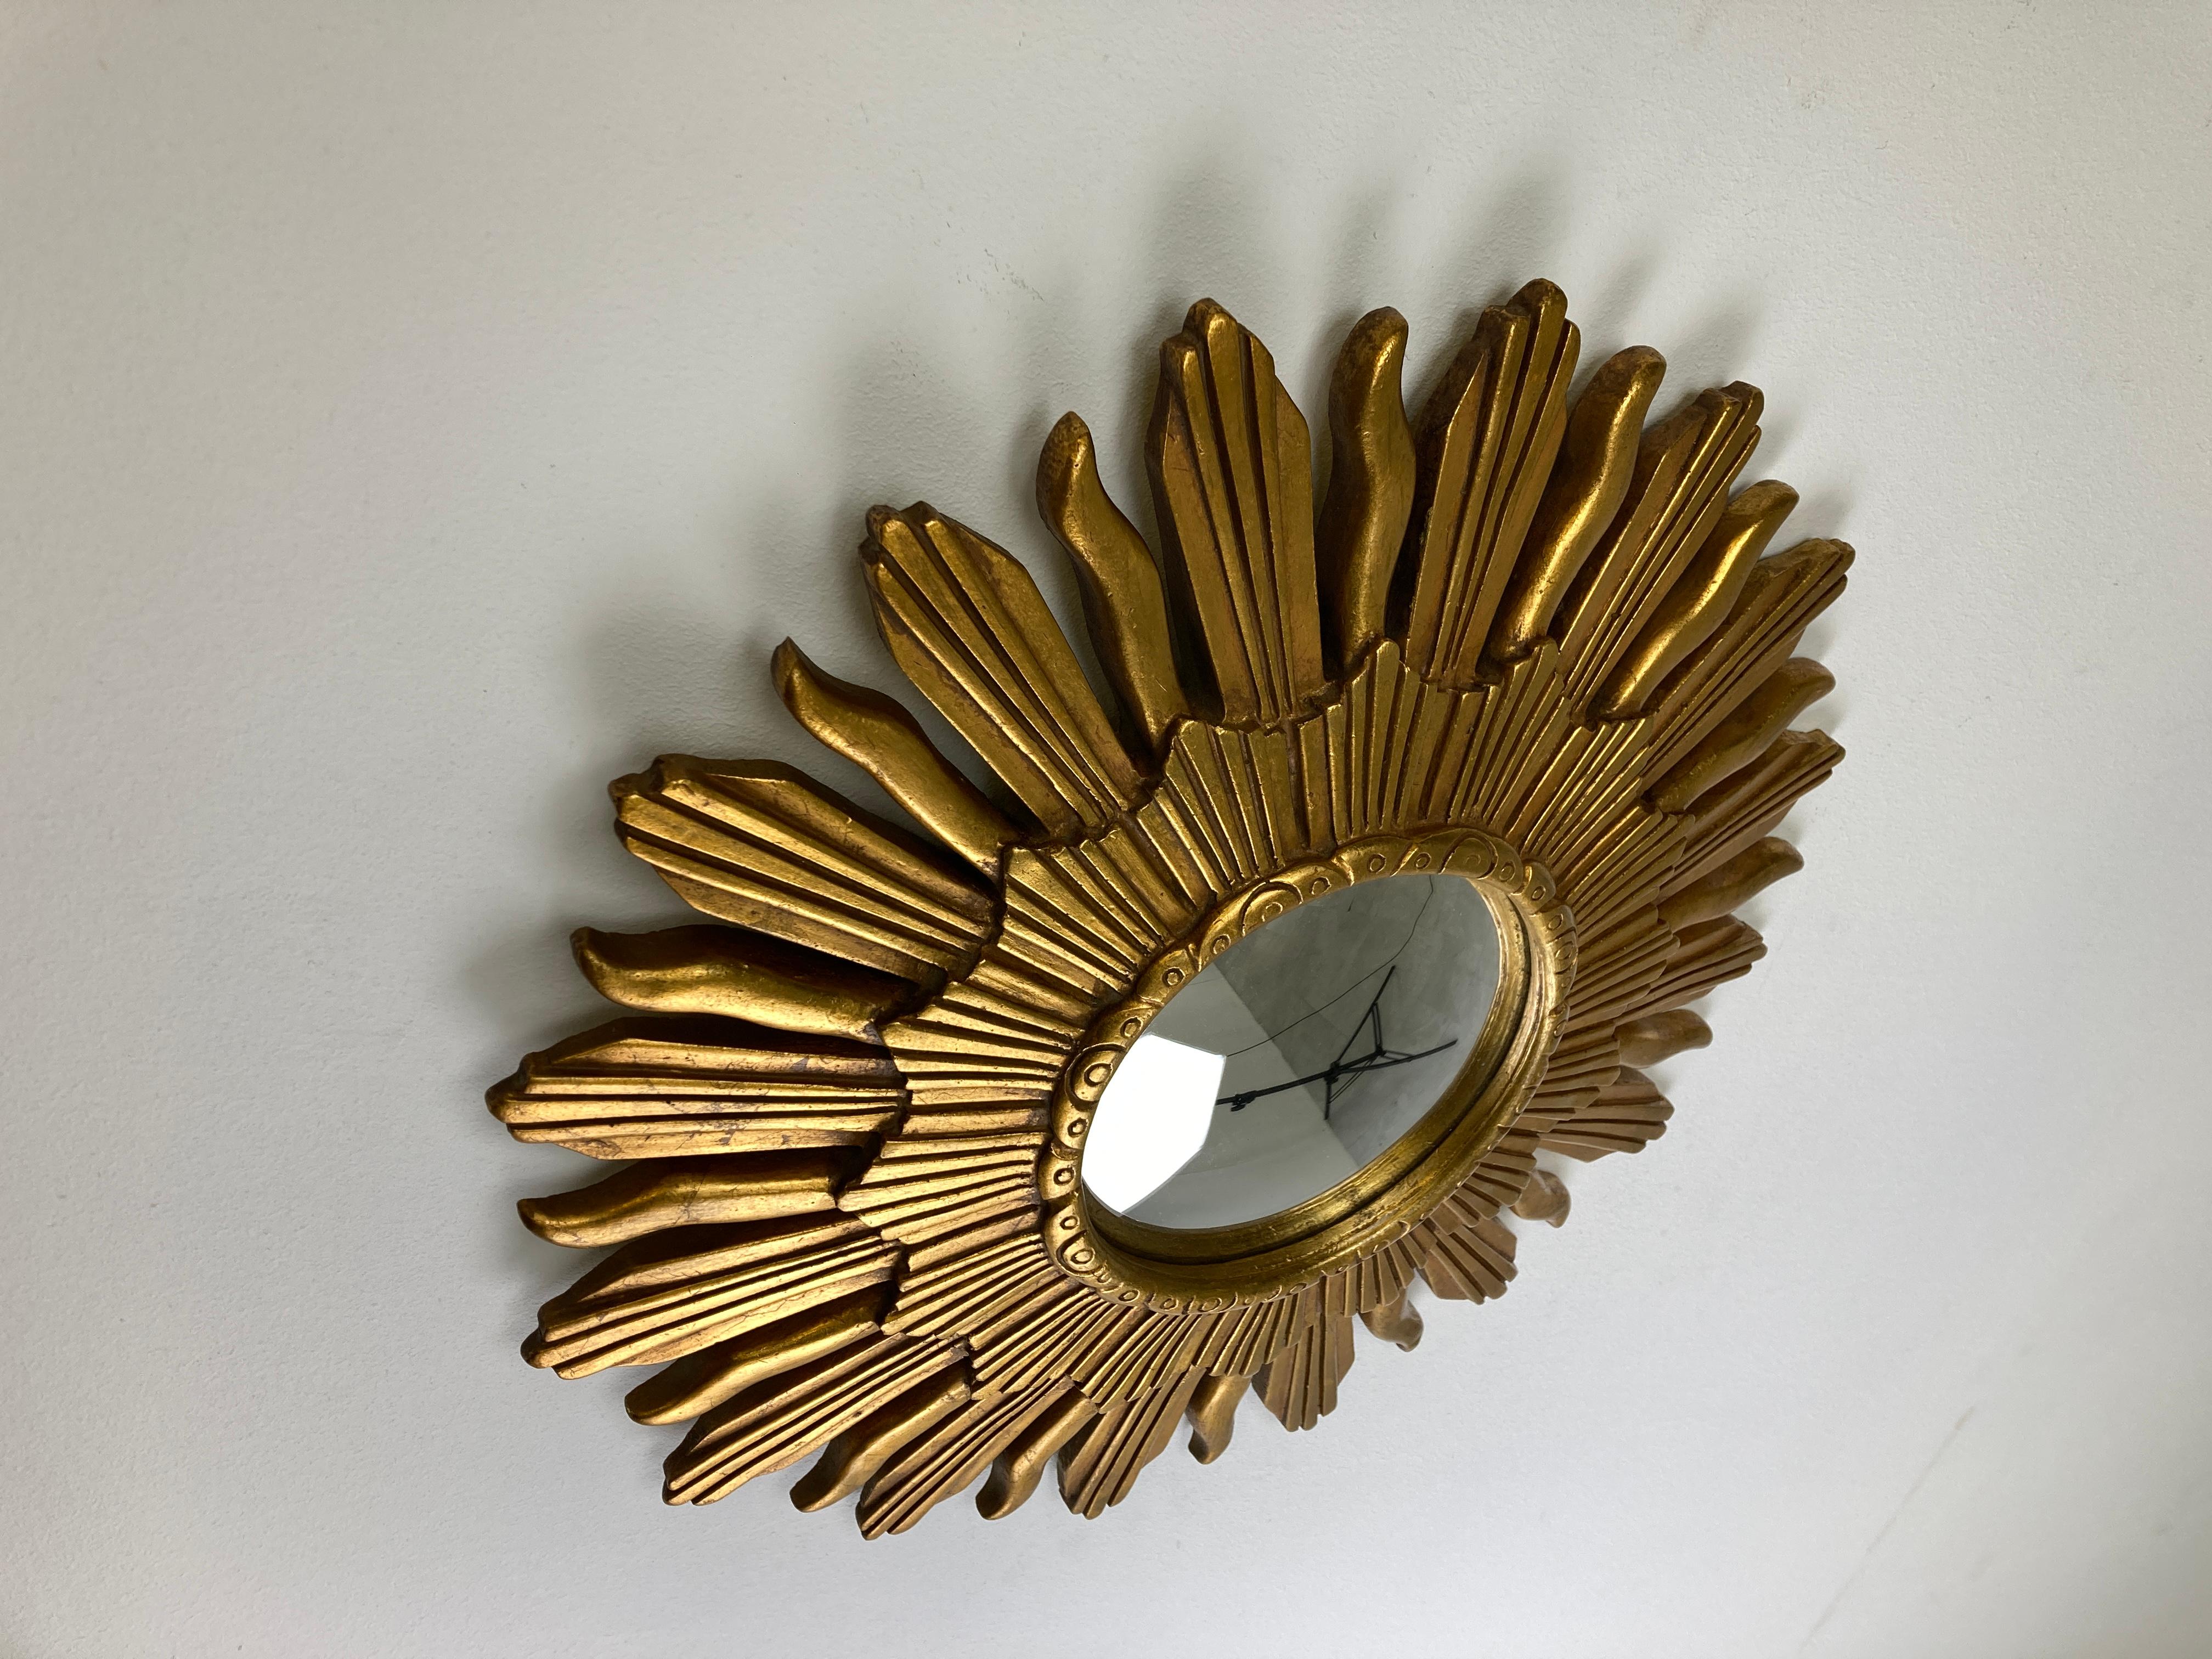 Gilded resin sunburst mirror with convex mirror glass.

The golden mirror is in a good condition.

1960s - made in Belgium.

Dimensions:
Diameter: 47cm/18.50